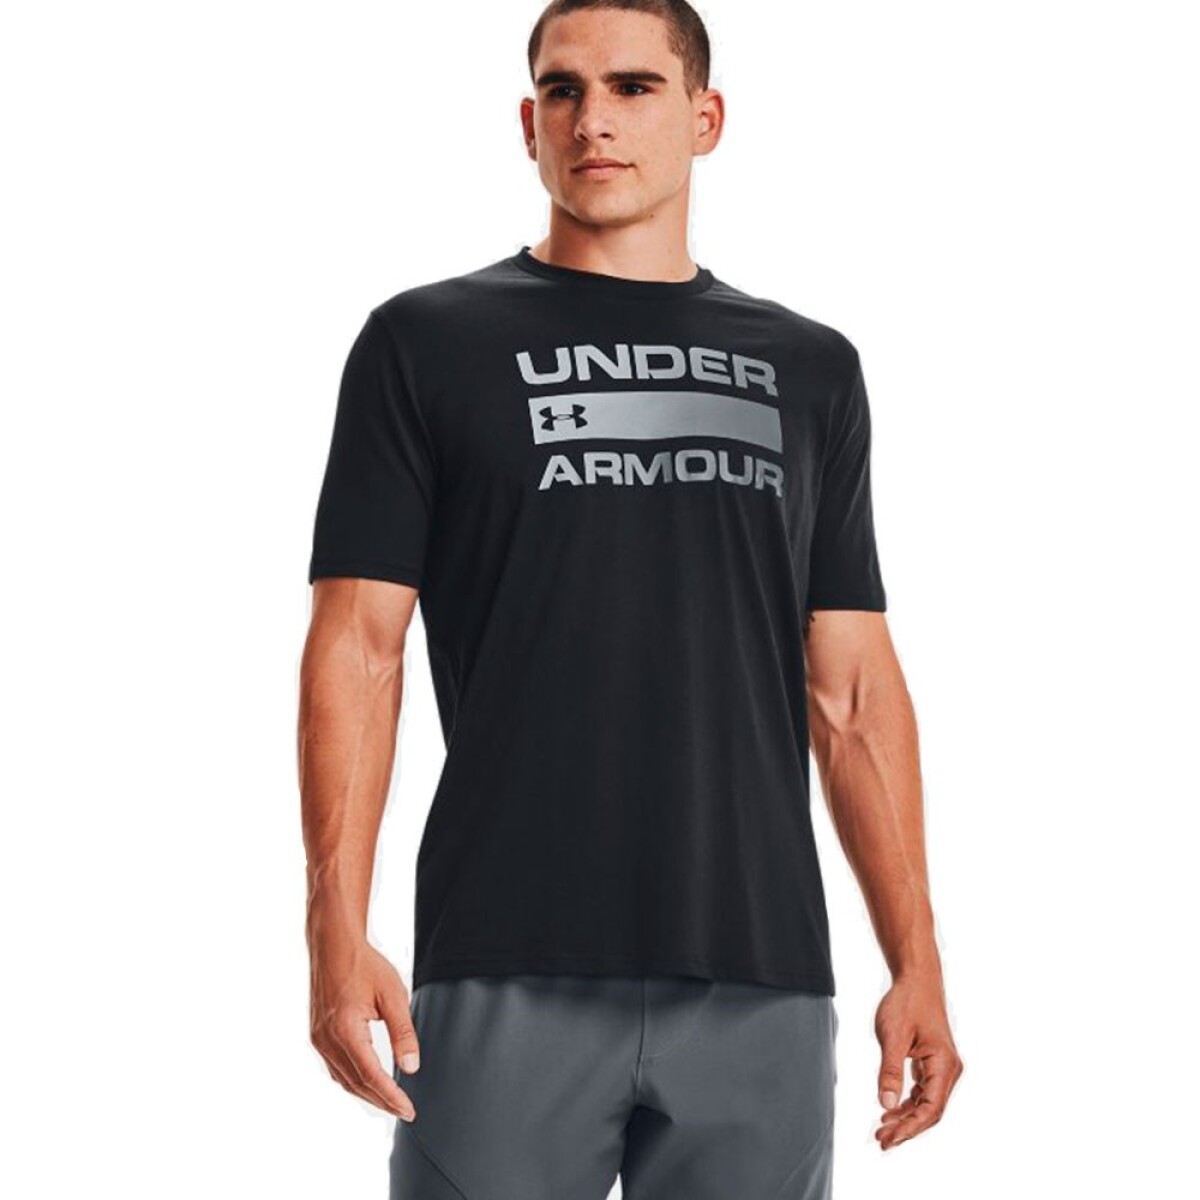 Remera Under Armour Hombre Team Issue - S/C 